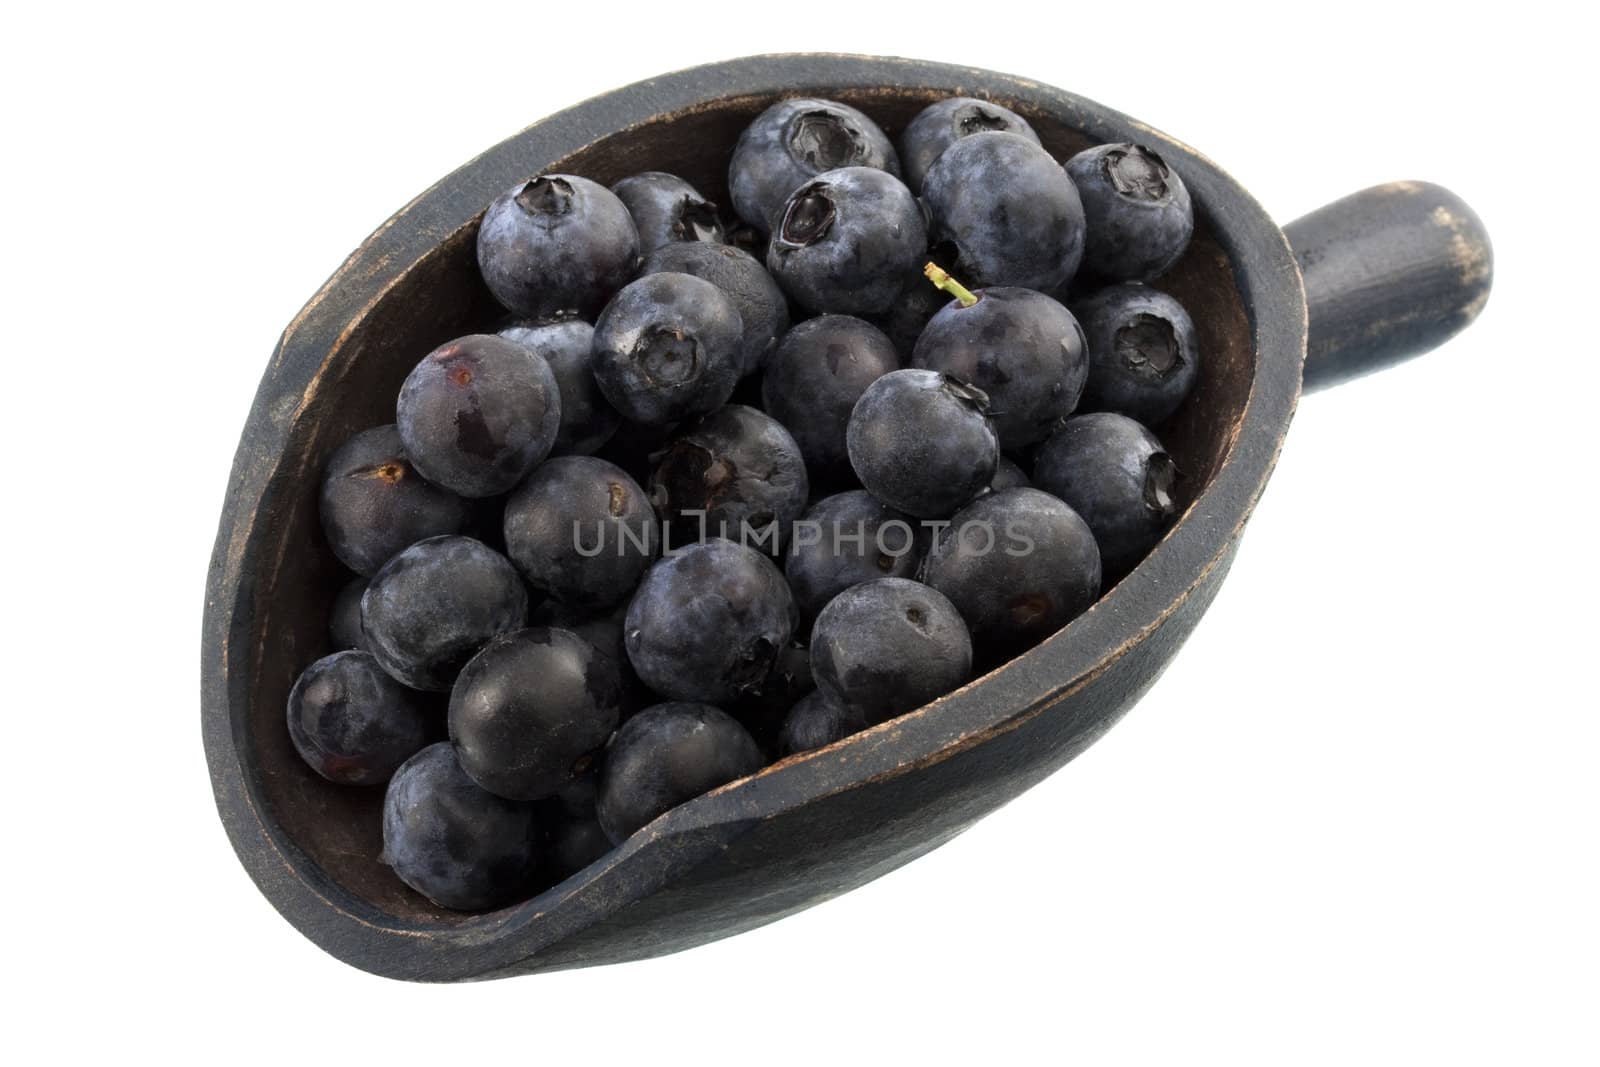 fresh blueberries on a rustic wooden scoop, isolated on white